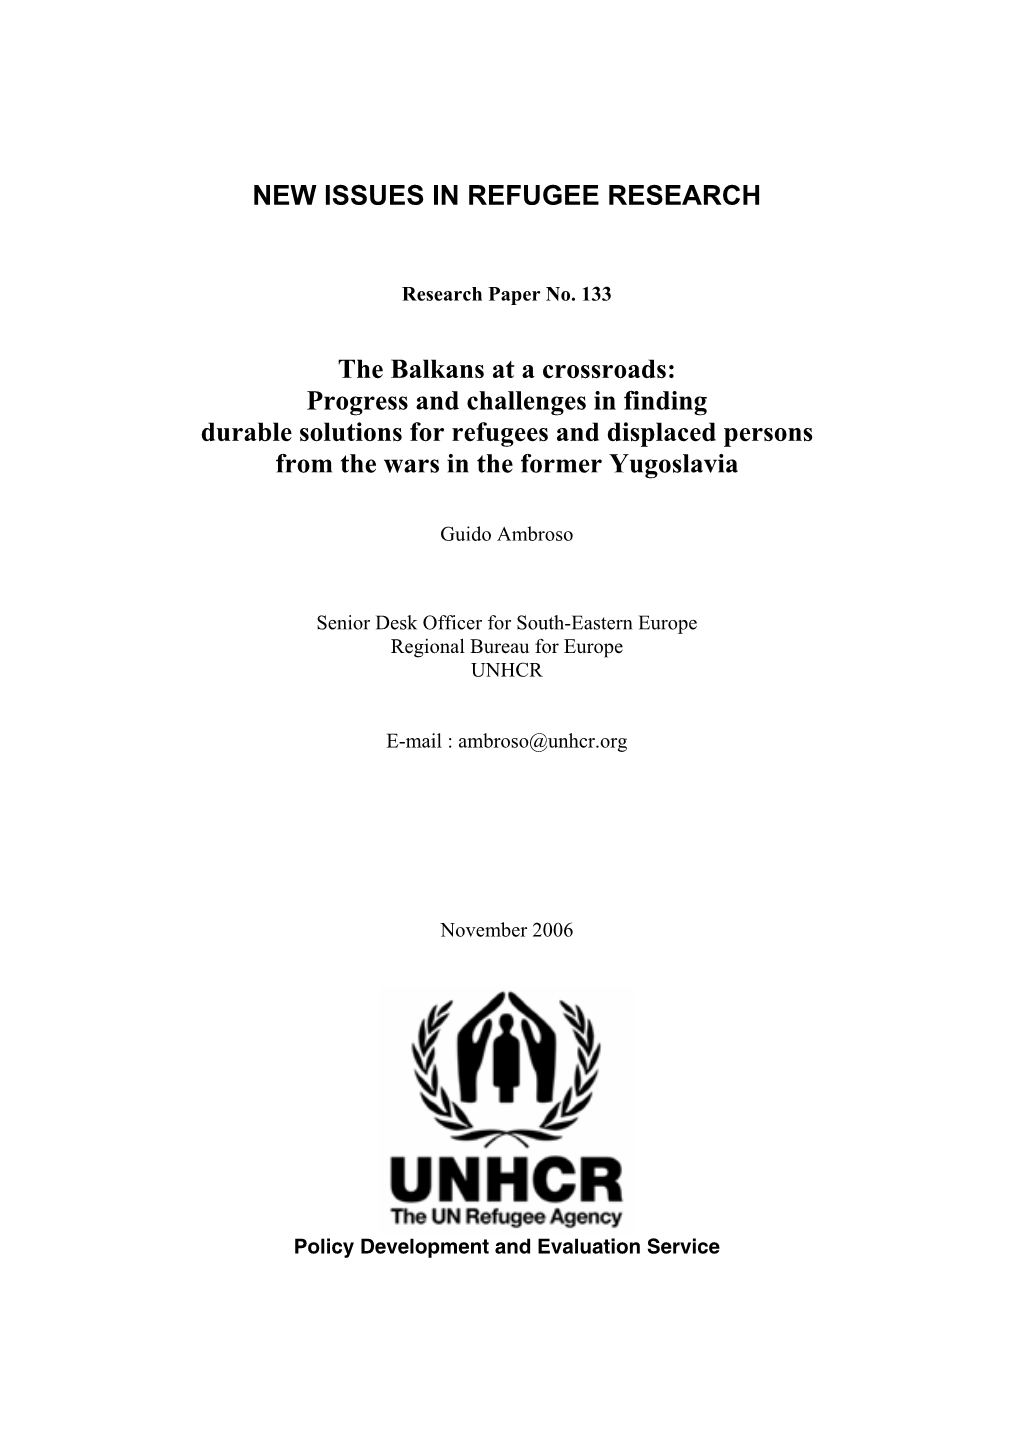 The Balkans at a Crossroads: Progress and Challenges in Finding Durable Solutions for Refugees and Displaced Persons from the Wars in the Former Yugoslavia